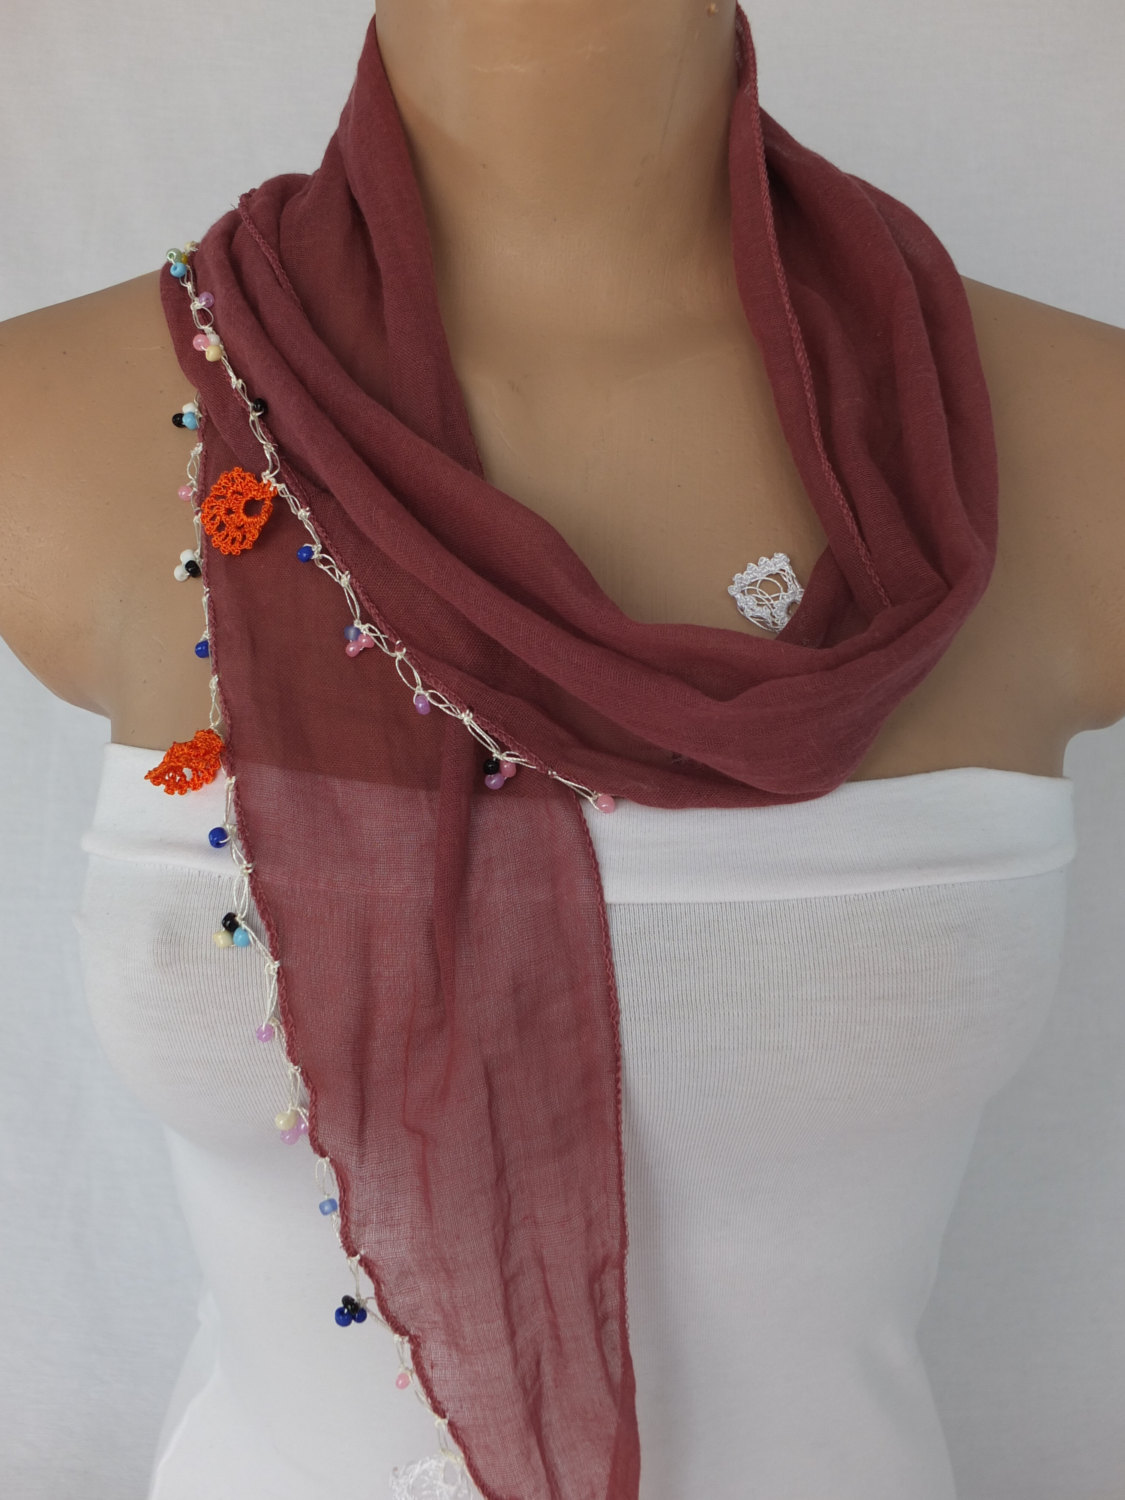 Cherry Color Scarf, Cotton Scarf With Bead And Crochet Flower Trim , Turkish Oya Scarf,scarf Necklace, Foulard,scarflette,